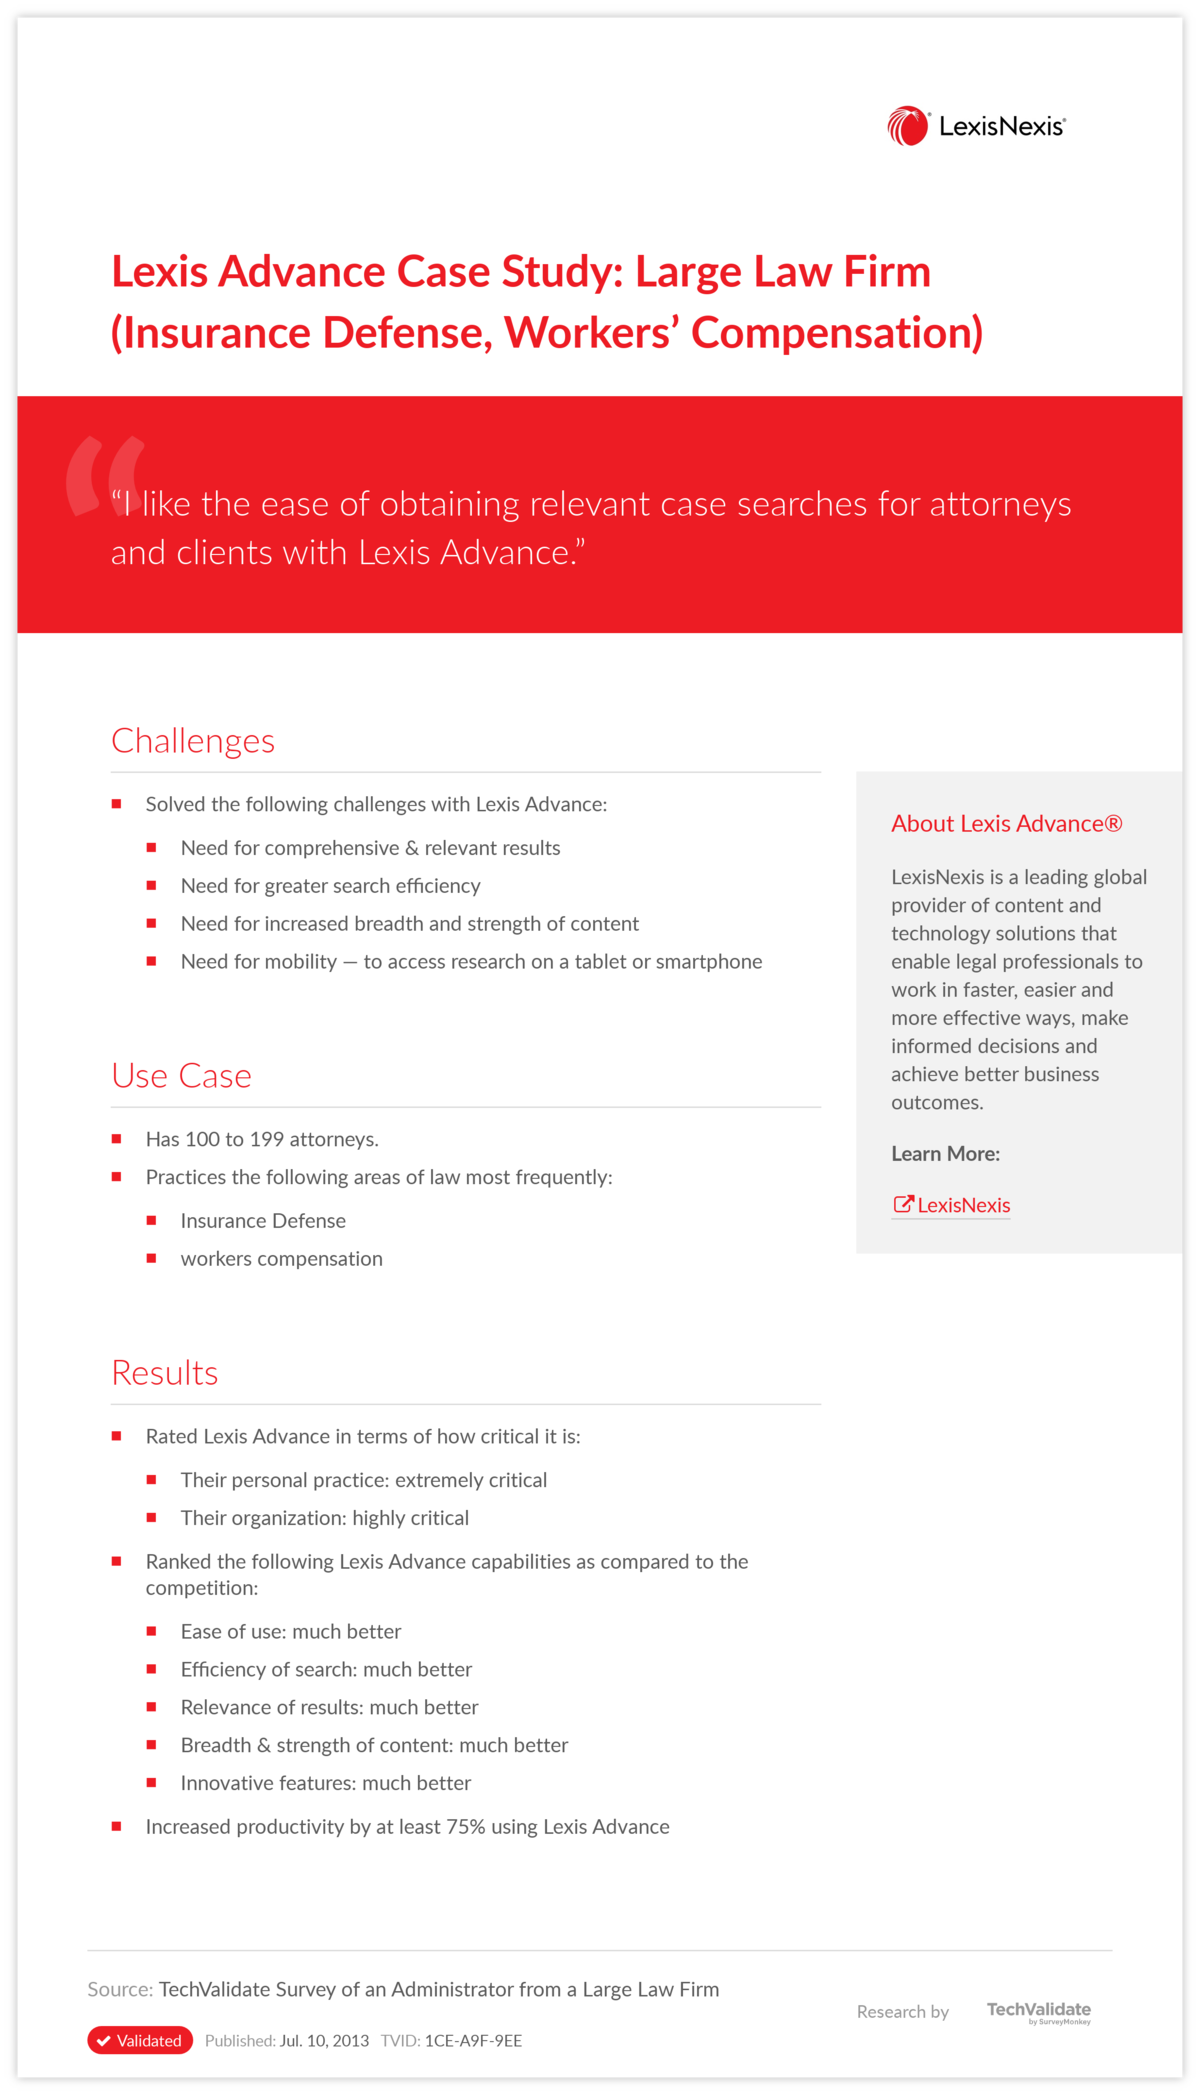 Lexis Advance Case Study: Large Law Firm (Insurance Defense, Workers' Compensation)